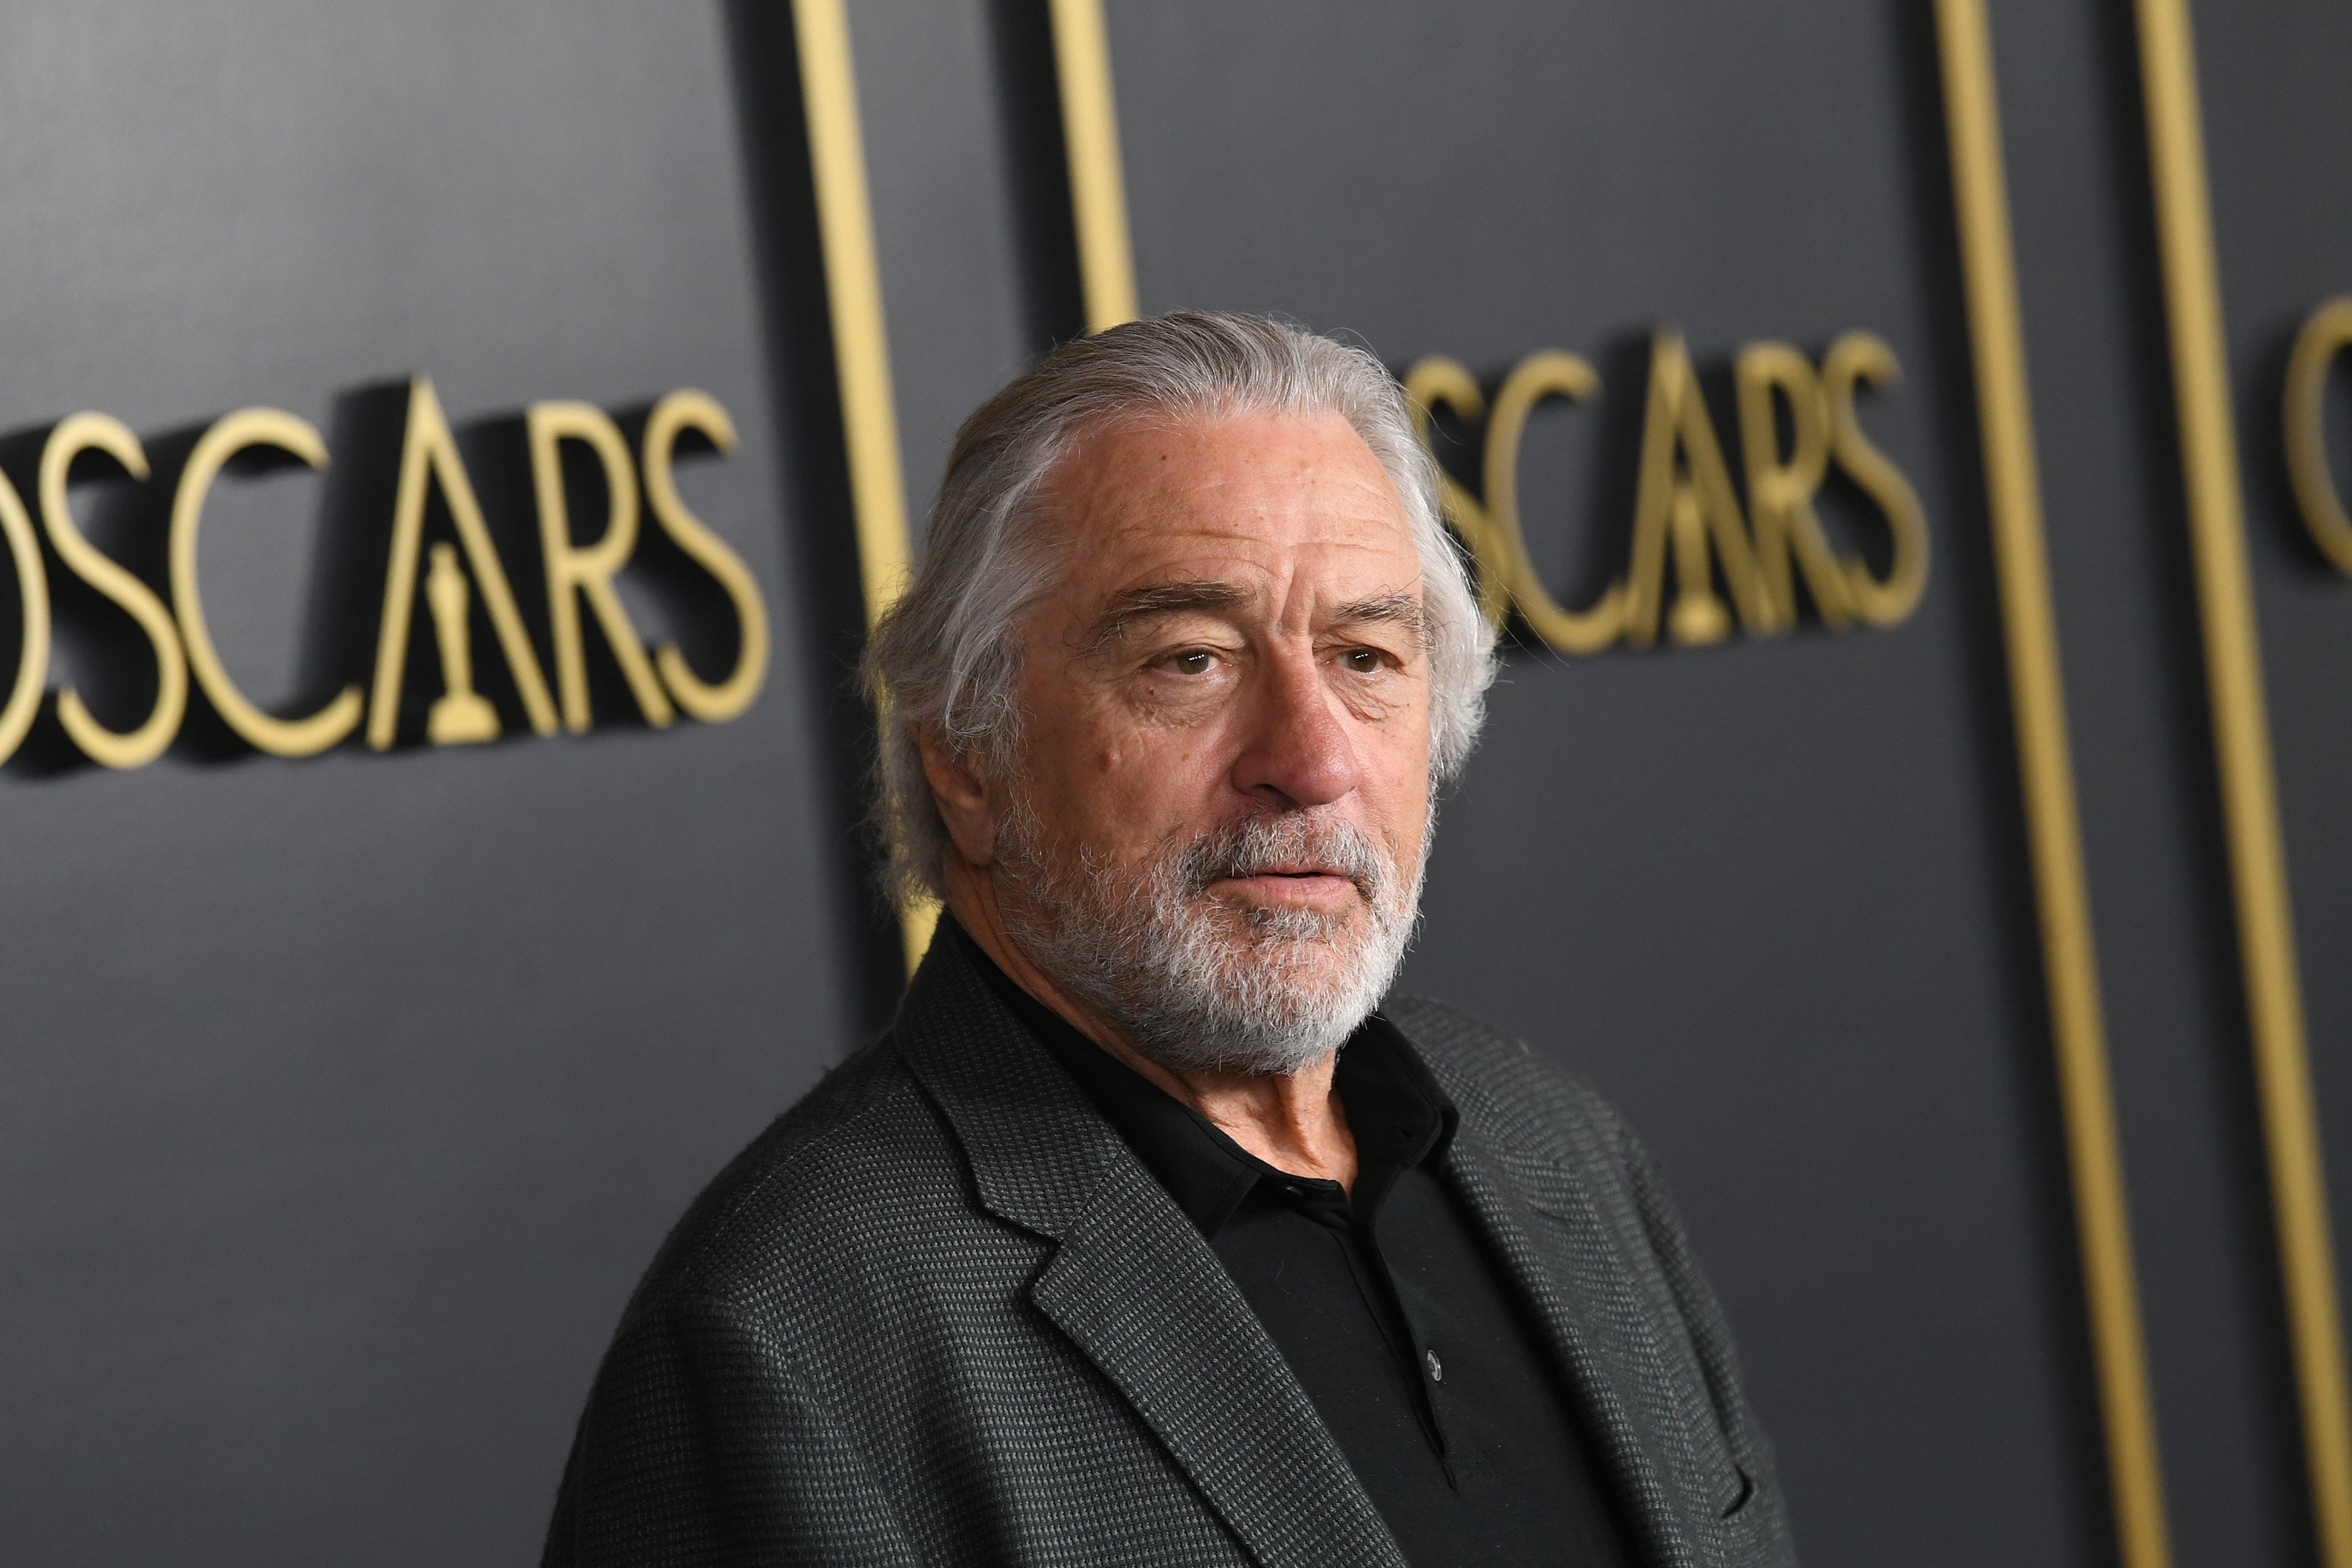 Robert De Niro at the 92nd Oscars Nominees Luncheon on January 27, 2020 | Source: Getty Images